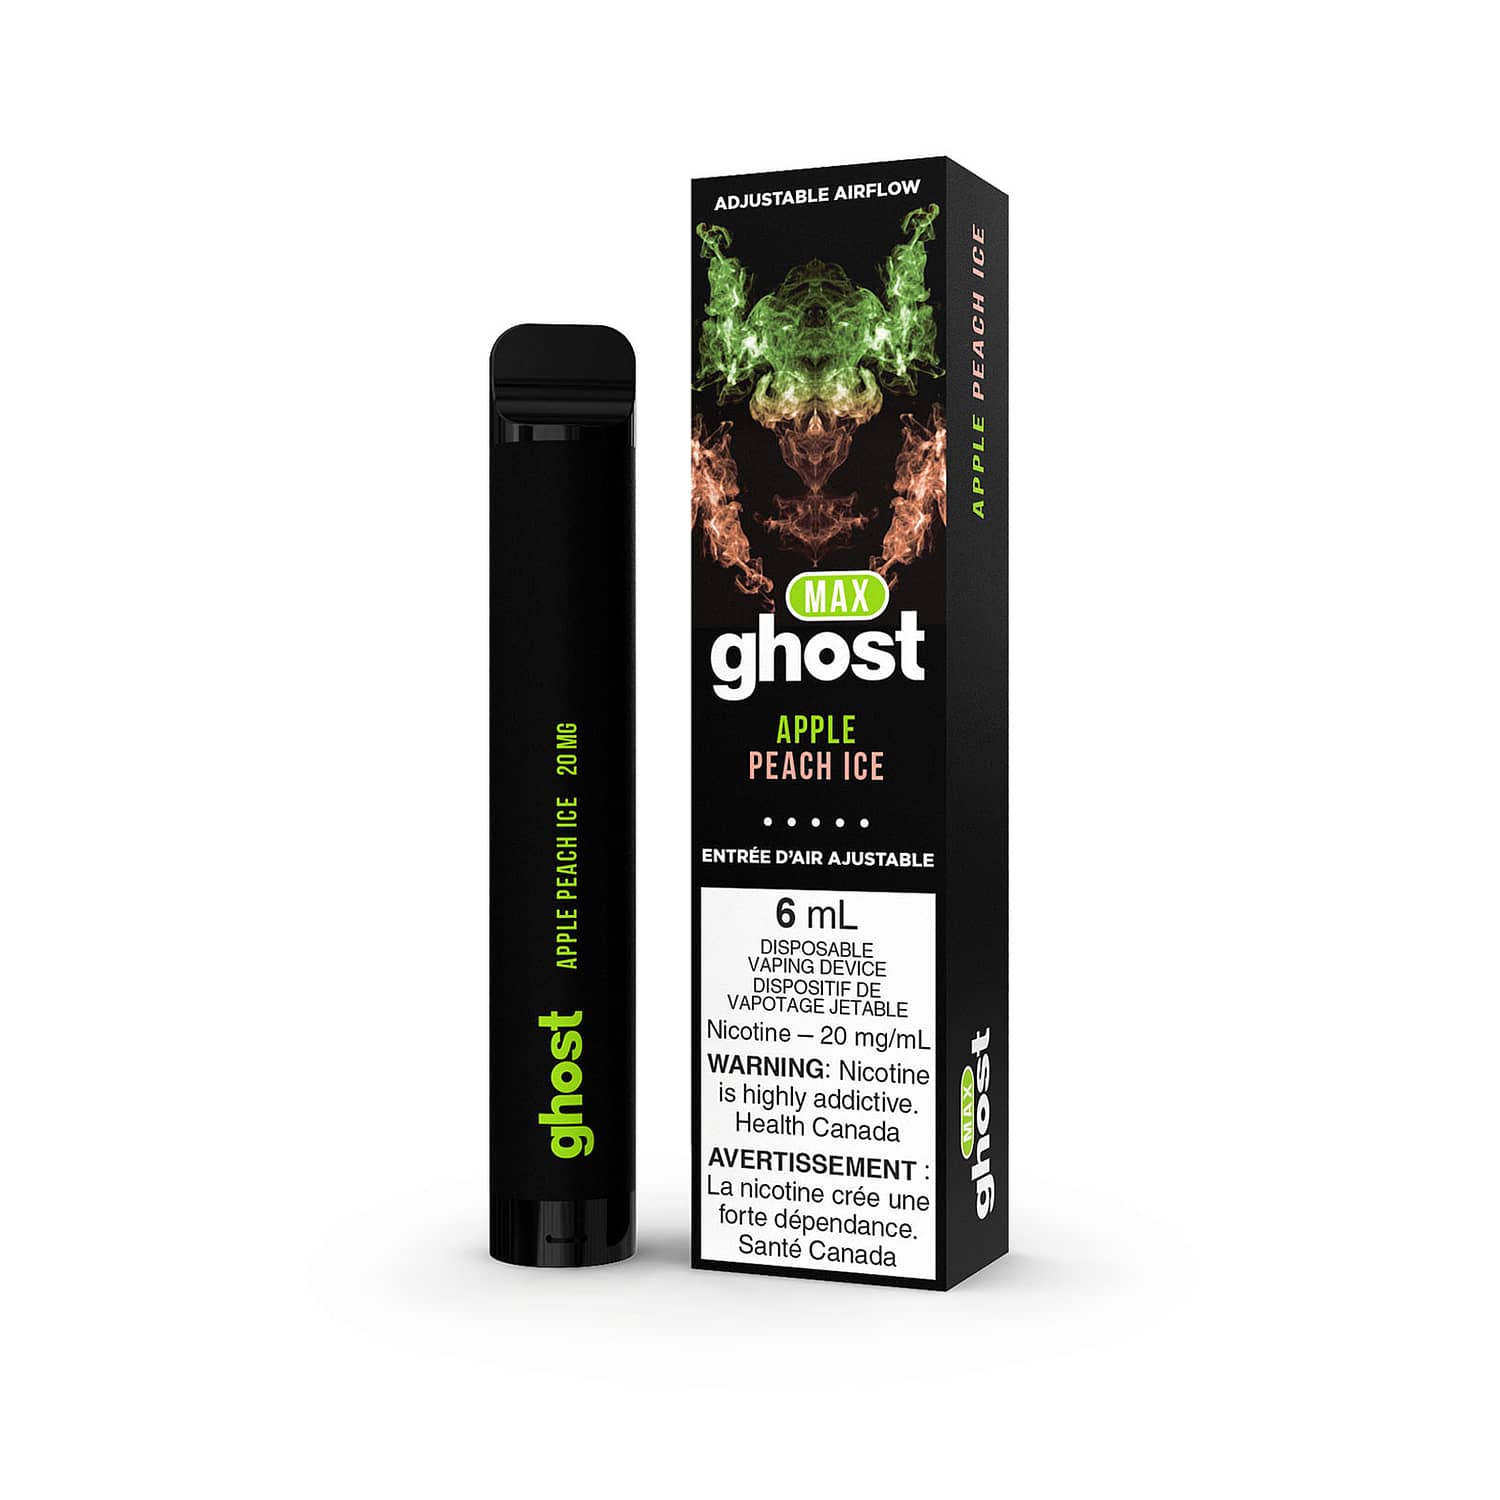 GHOST MAX Disposable Apple Peach Ice is an excellent blend of crisp juicy apples, ripe plump peaches, infused with a splash of ice.